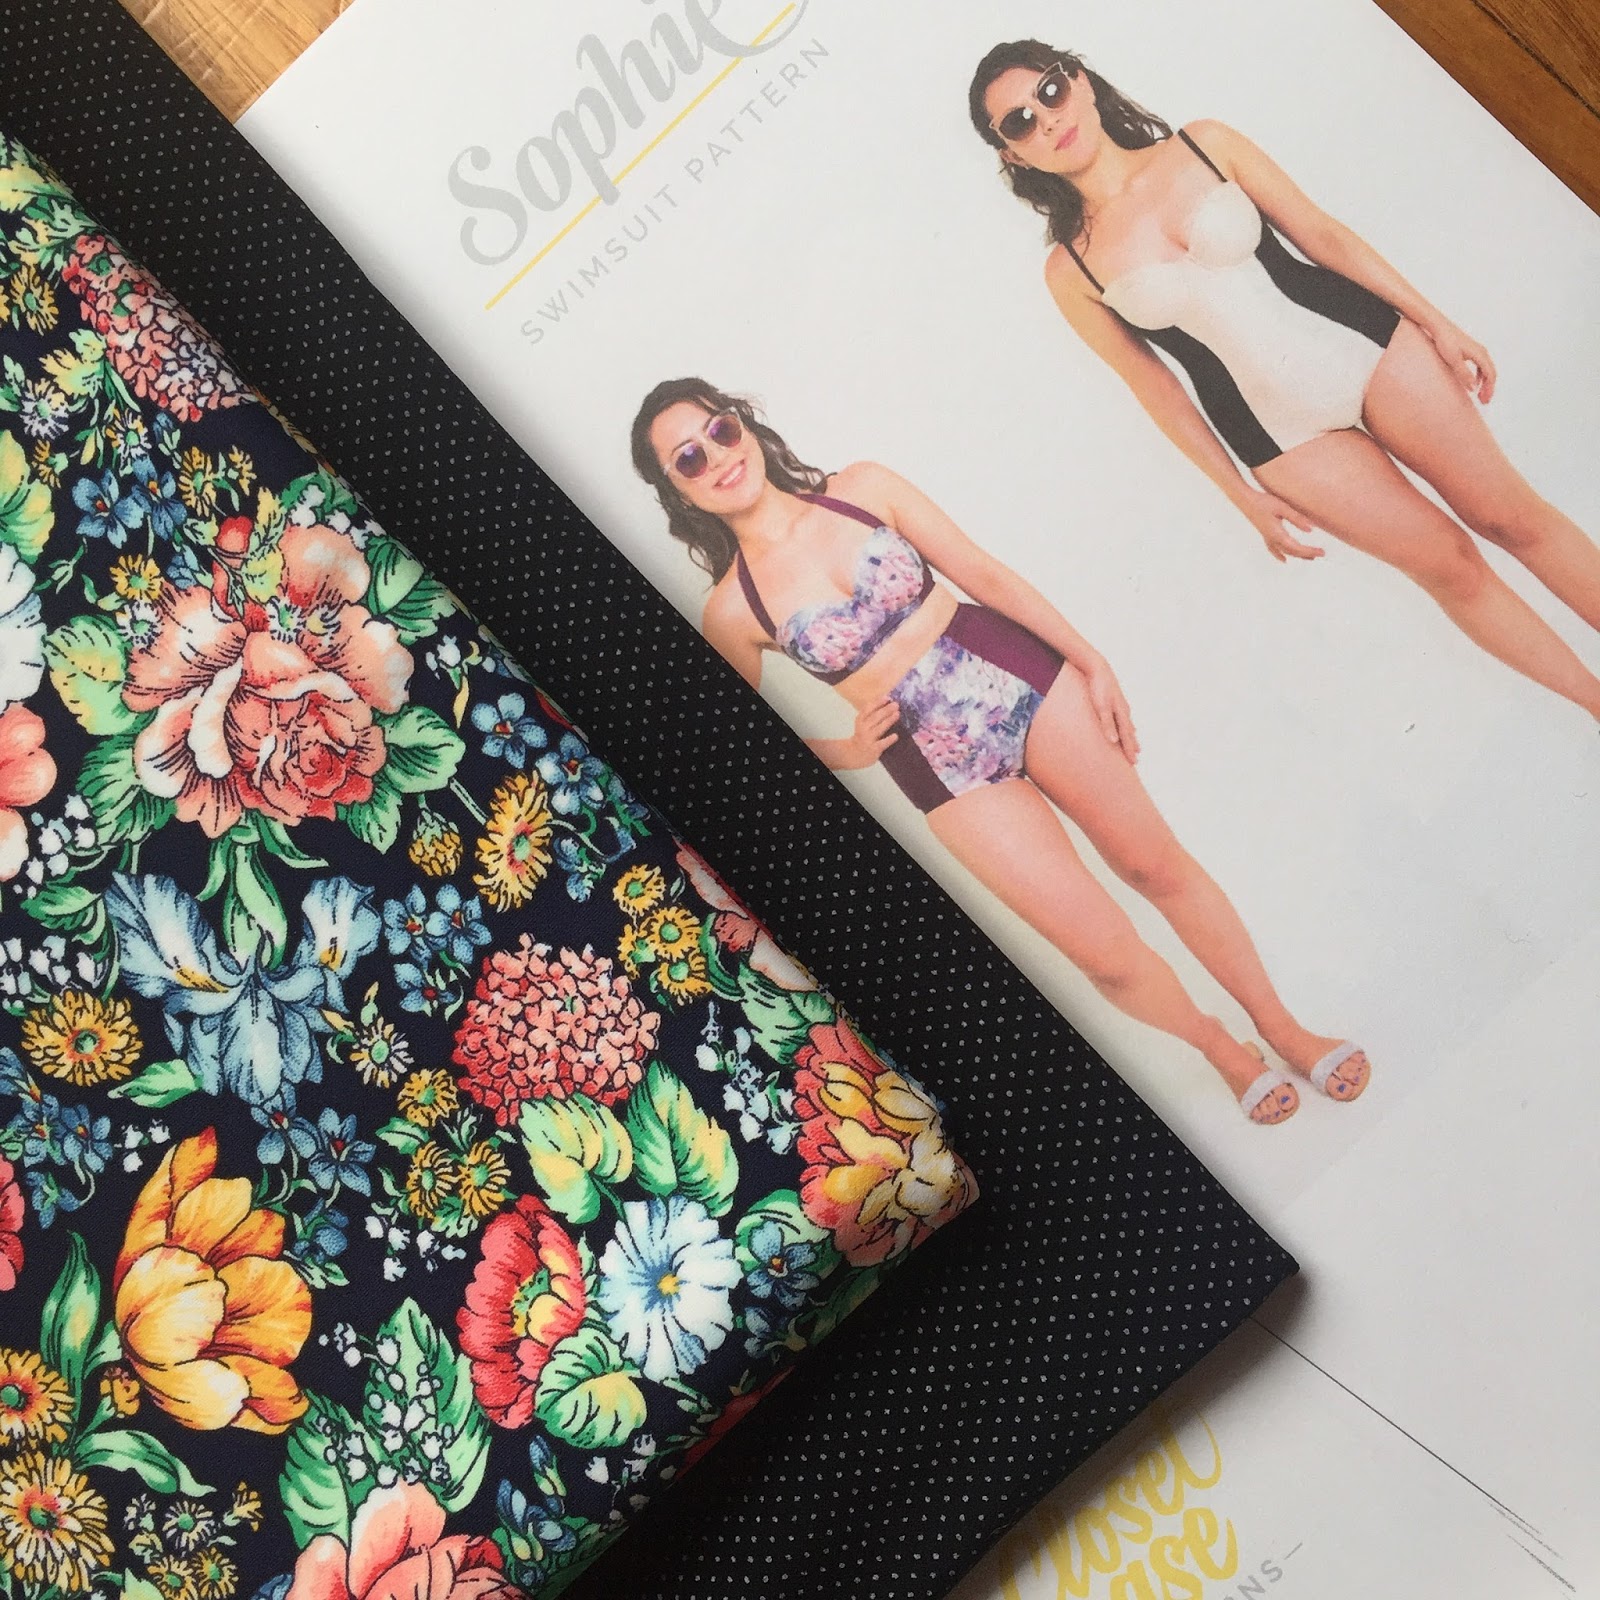 Swimwear Fabric Recommendations Guide